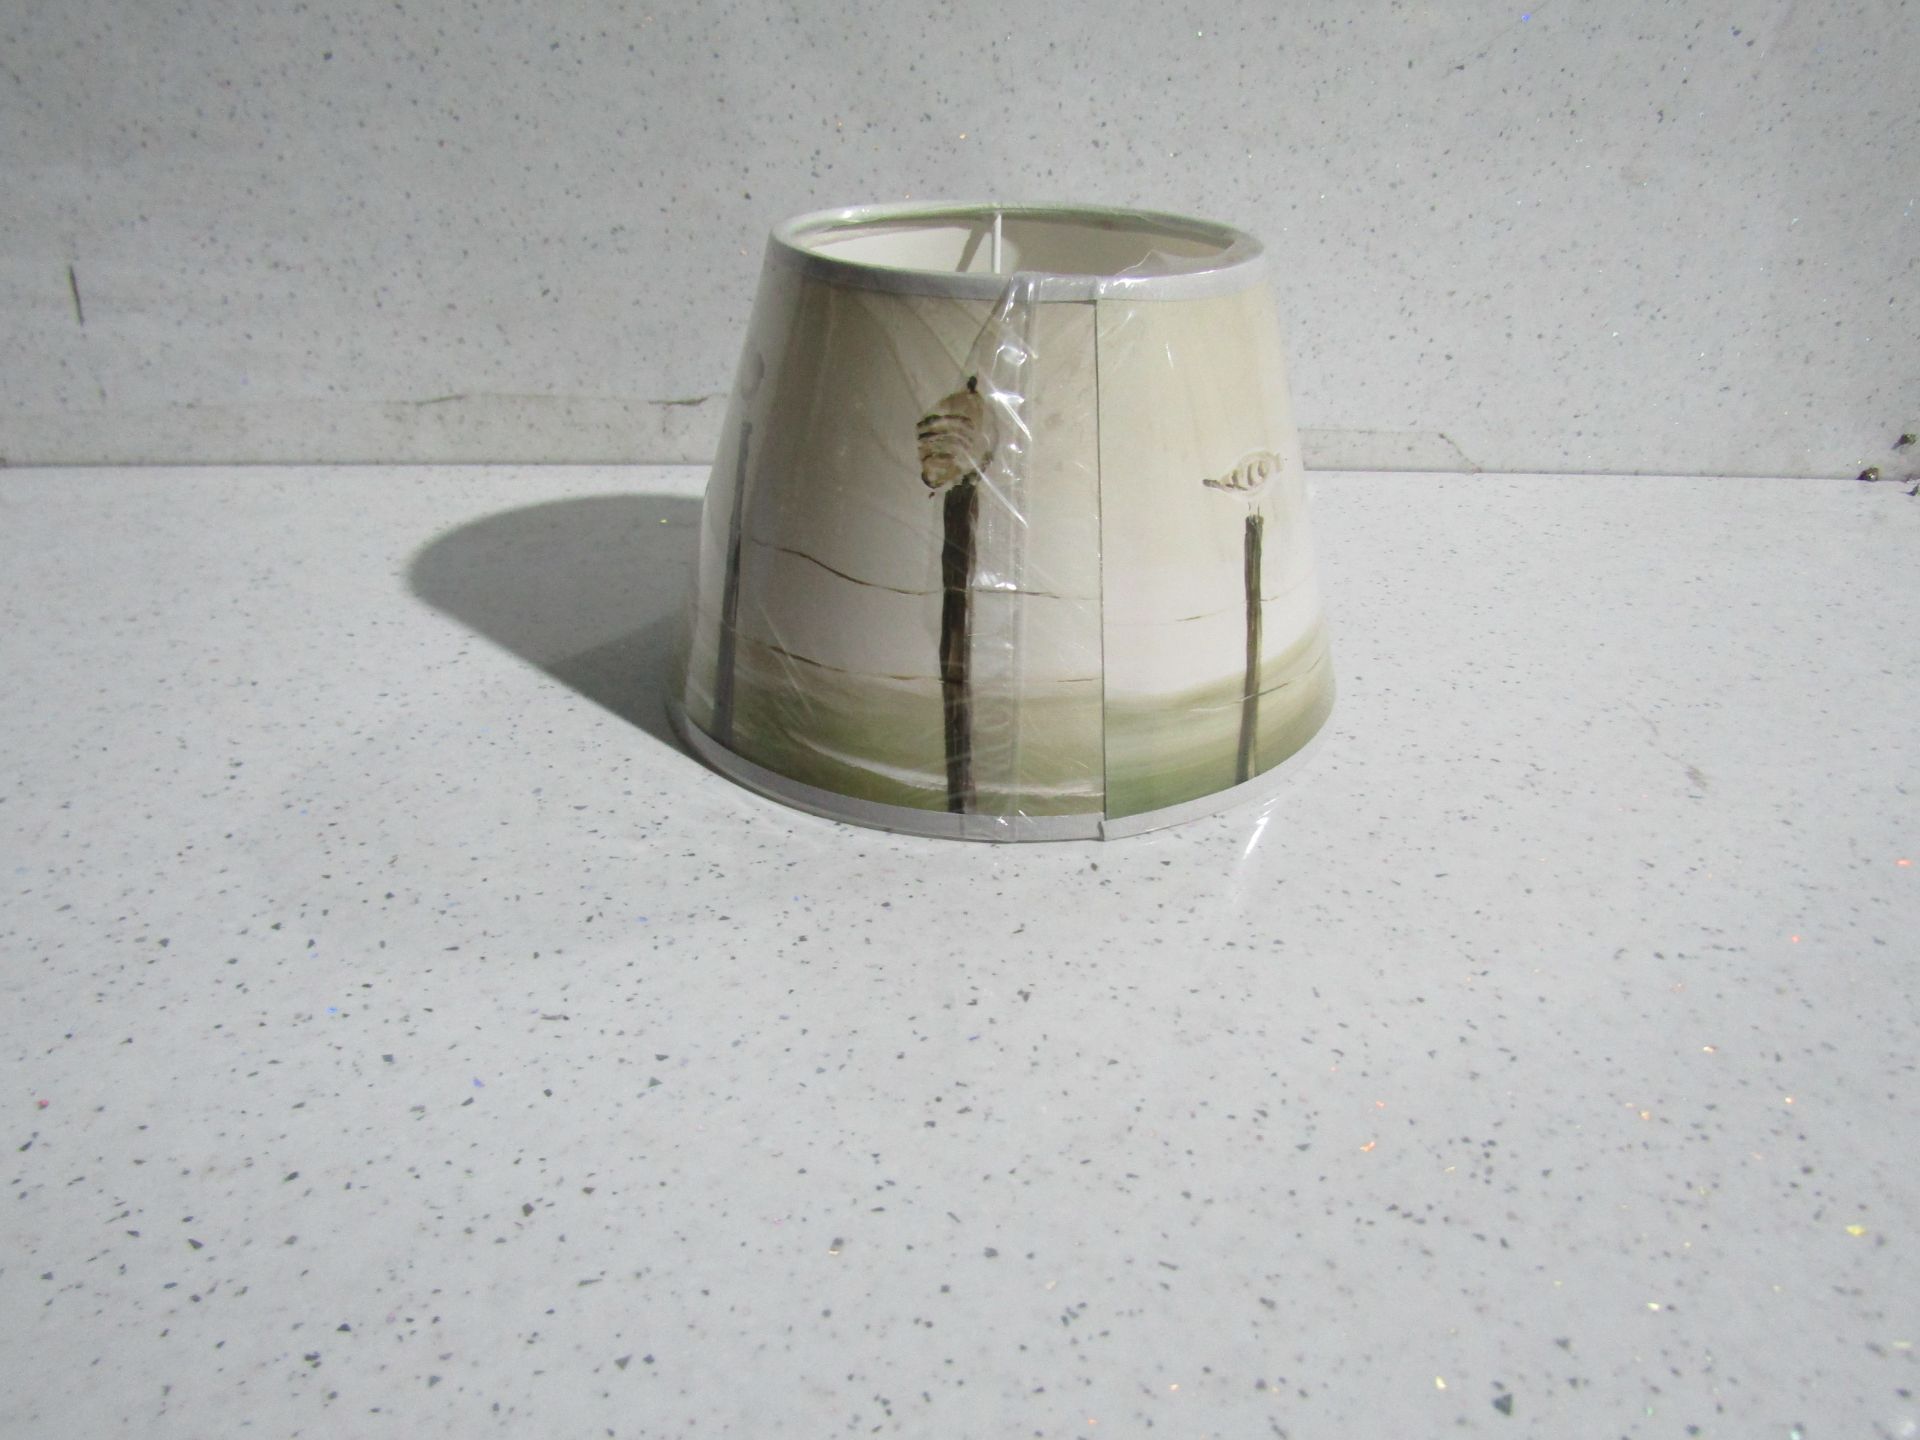 Coastal Birds Lampshade Small. Size: D20 x D13 x H13cm - RRP œ50.00 - New & Packaged. (335) - Image 2 of 2